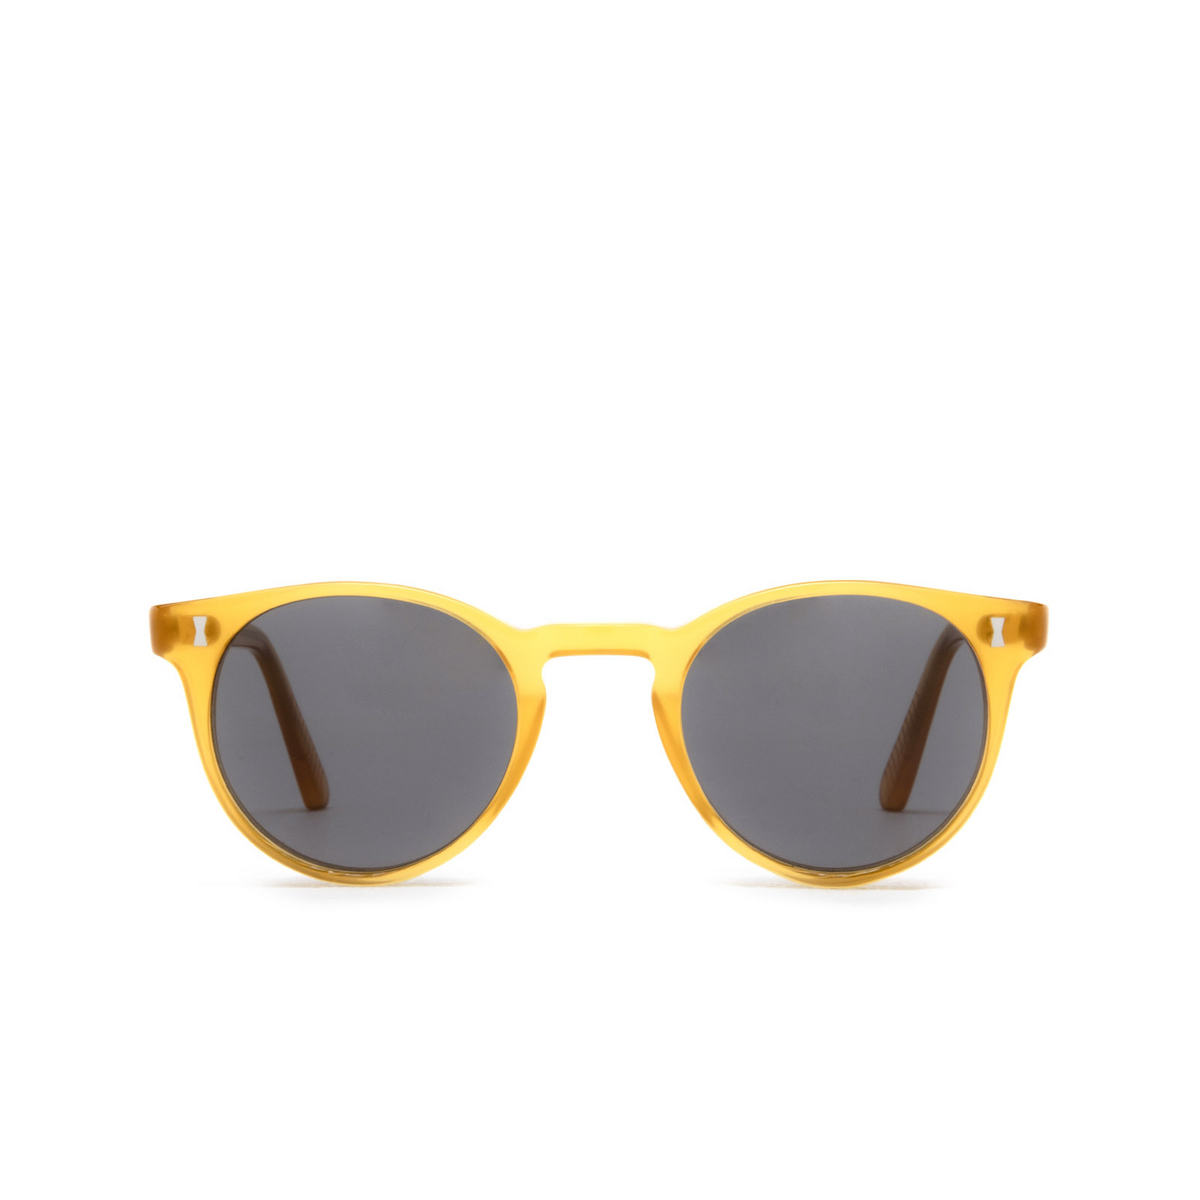 Cubitts HERBRAND Sunglasses HER-R-HON Honey - front view